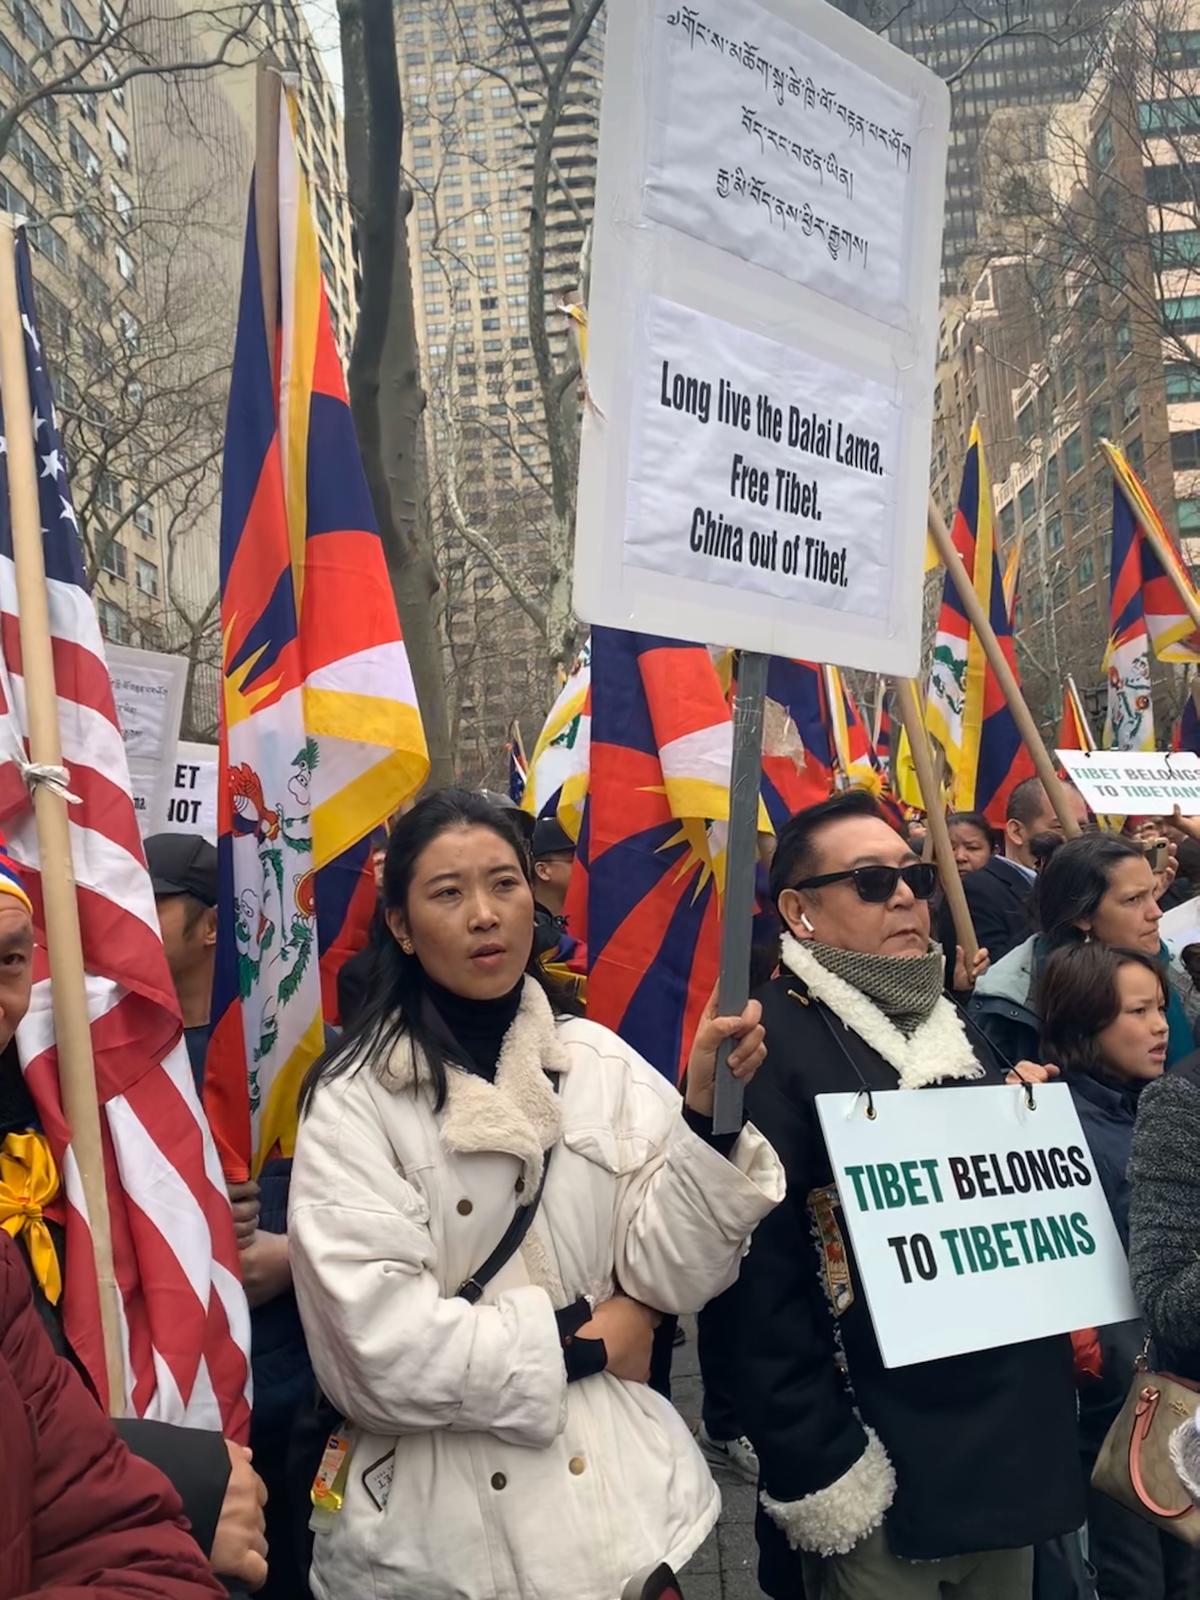 OVER A THOUSAND TIBETANS AND SUPPORTERS IN NYC MARCH FOR FREEDOM IN ...